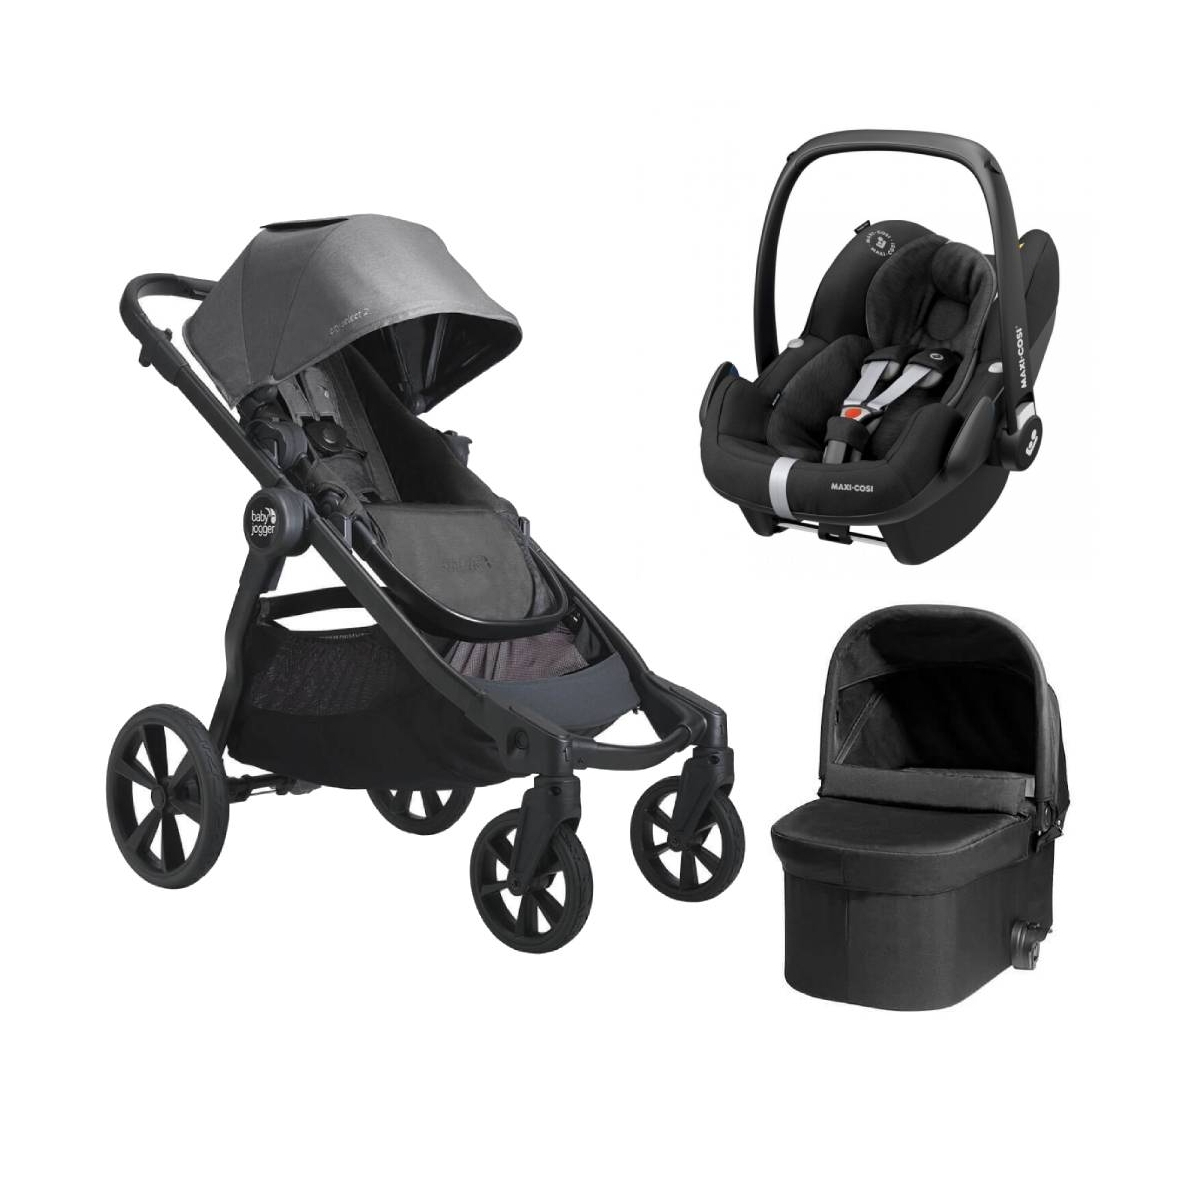 Baby Jogger City Select 2 Stroller